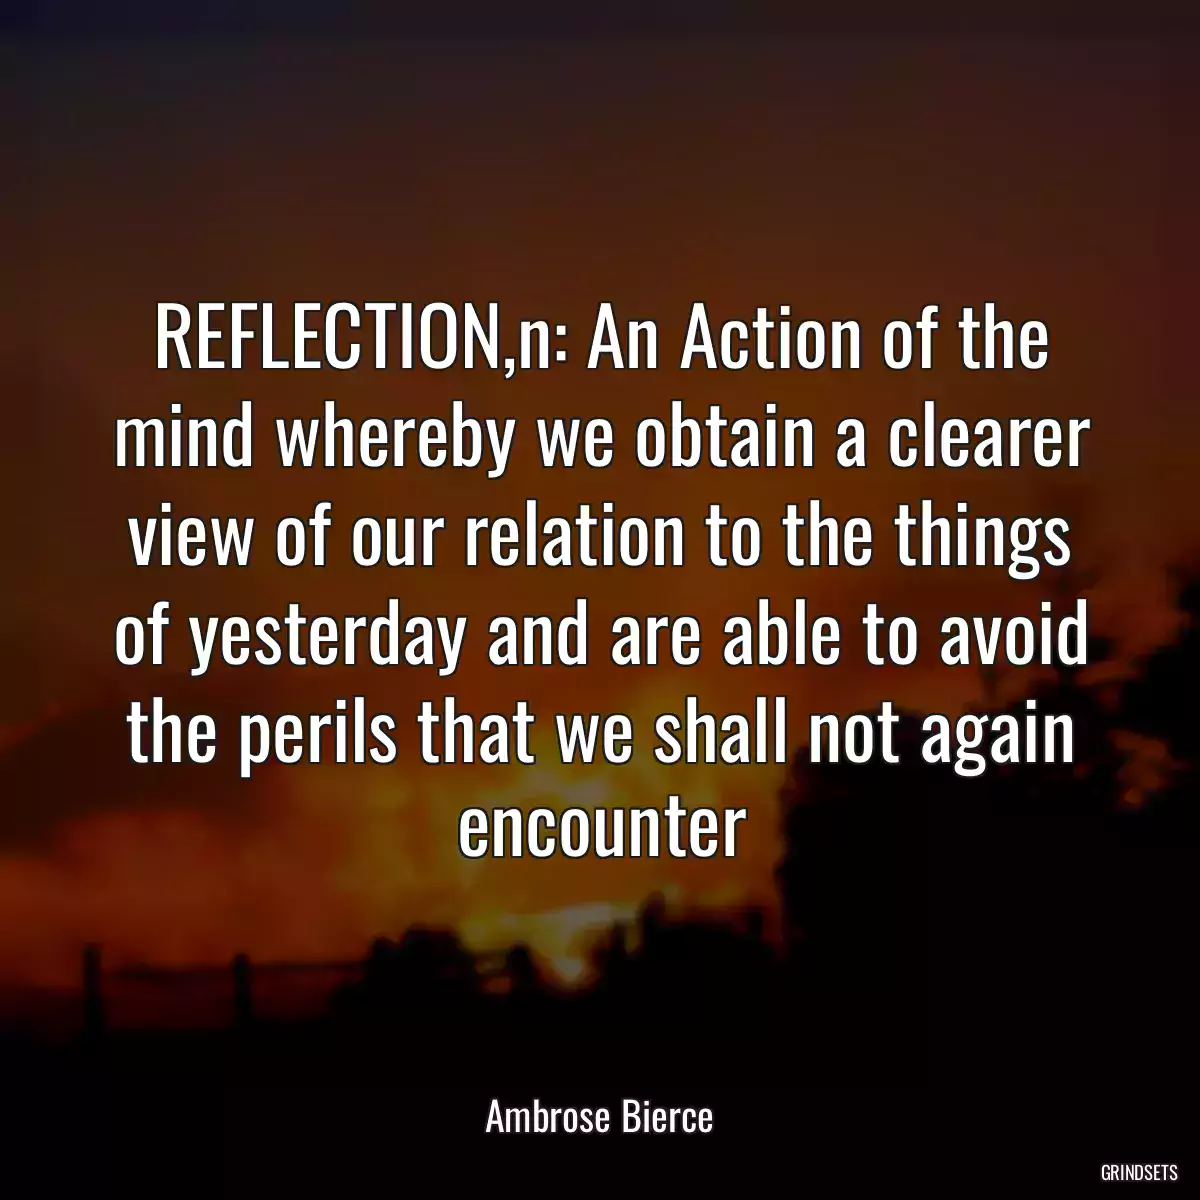 REFLECTION,n: An Action of the mind whereby we obtain a clearer view of our relation to the things of yesterday and are able to avoid the perils that we shall not again encounter